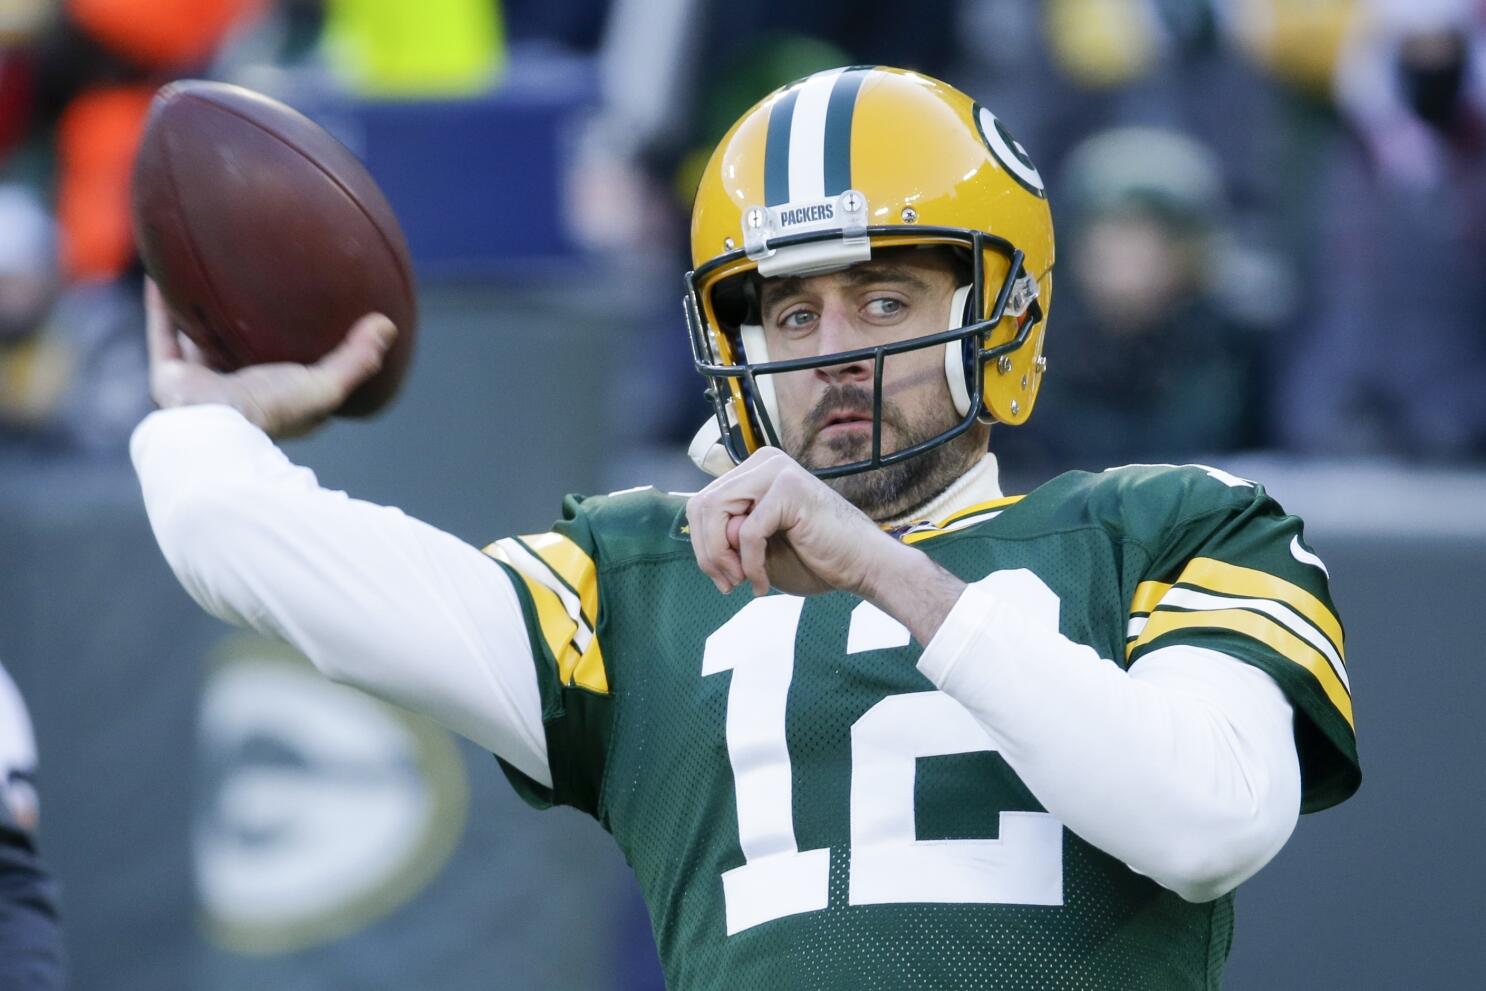 Green Bay Temperatures To Be In 20s For Packers Game